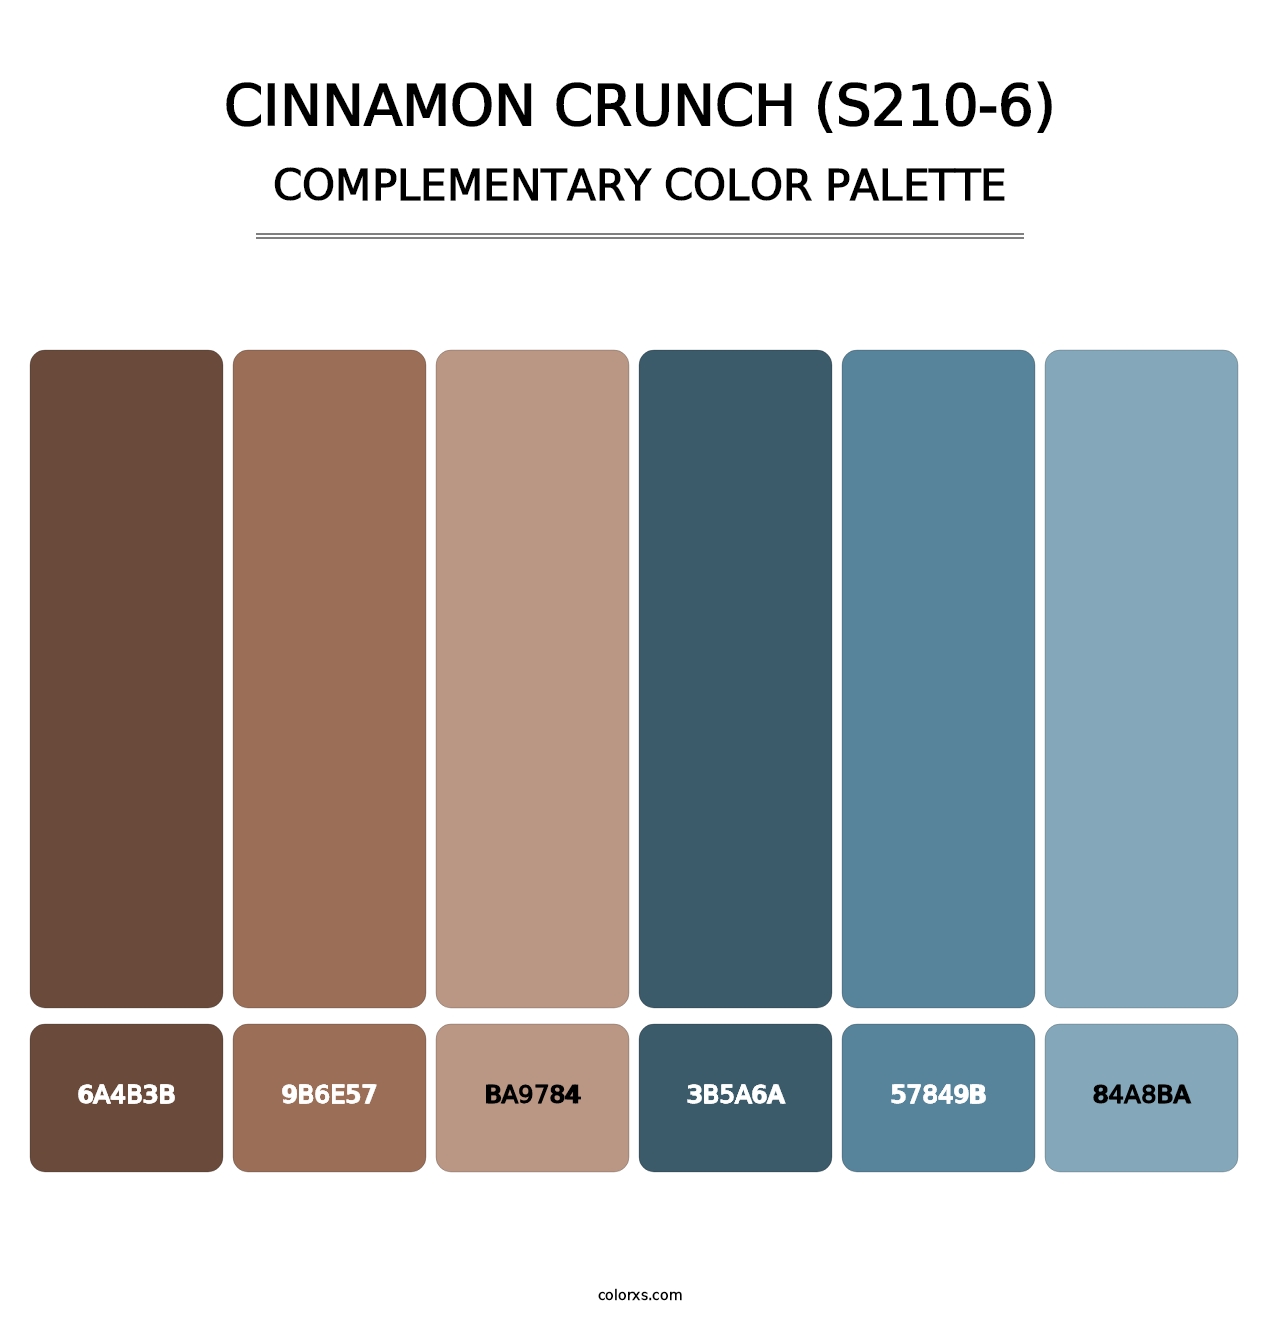 Cinnamon Crunch (S210-6) - Complementary Color Palette